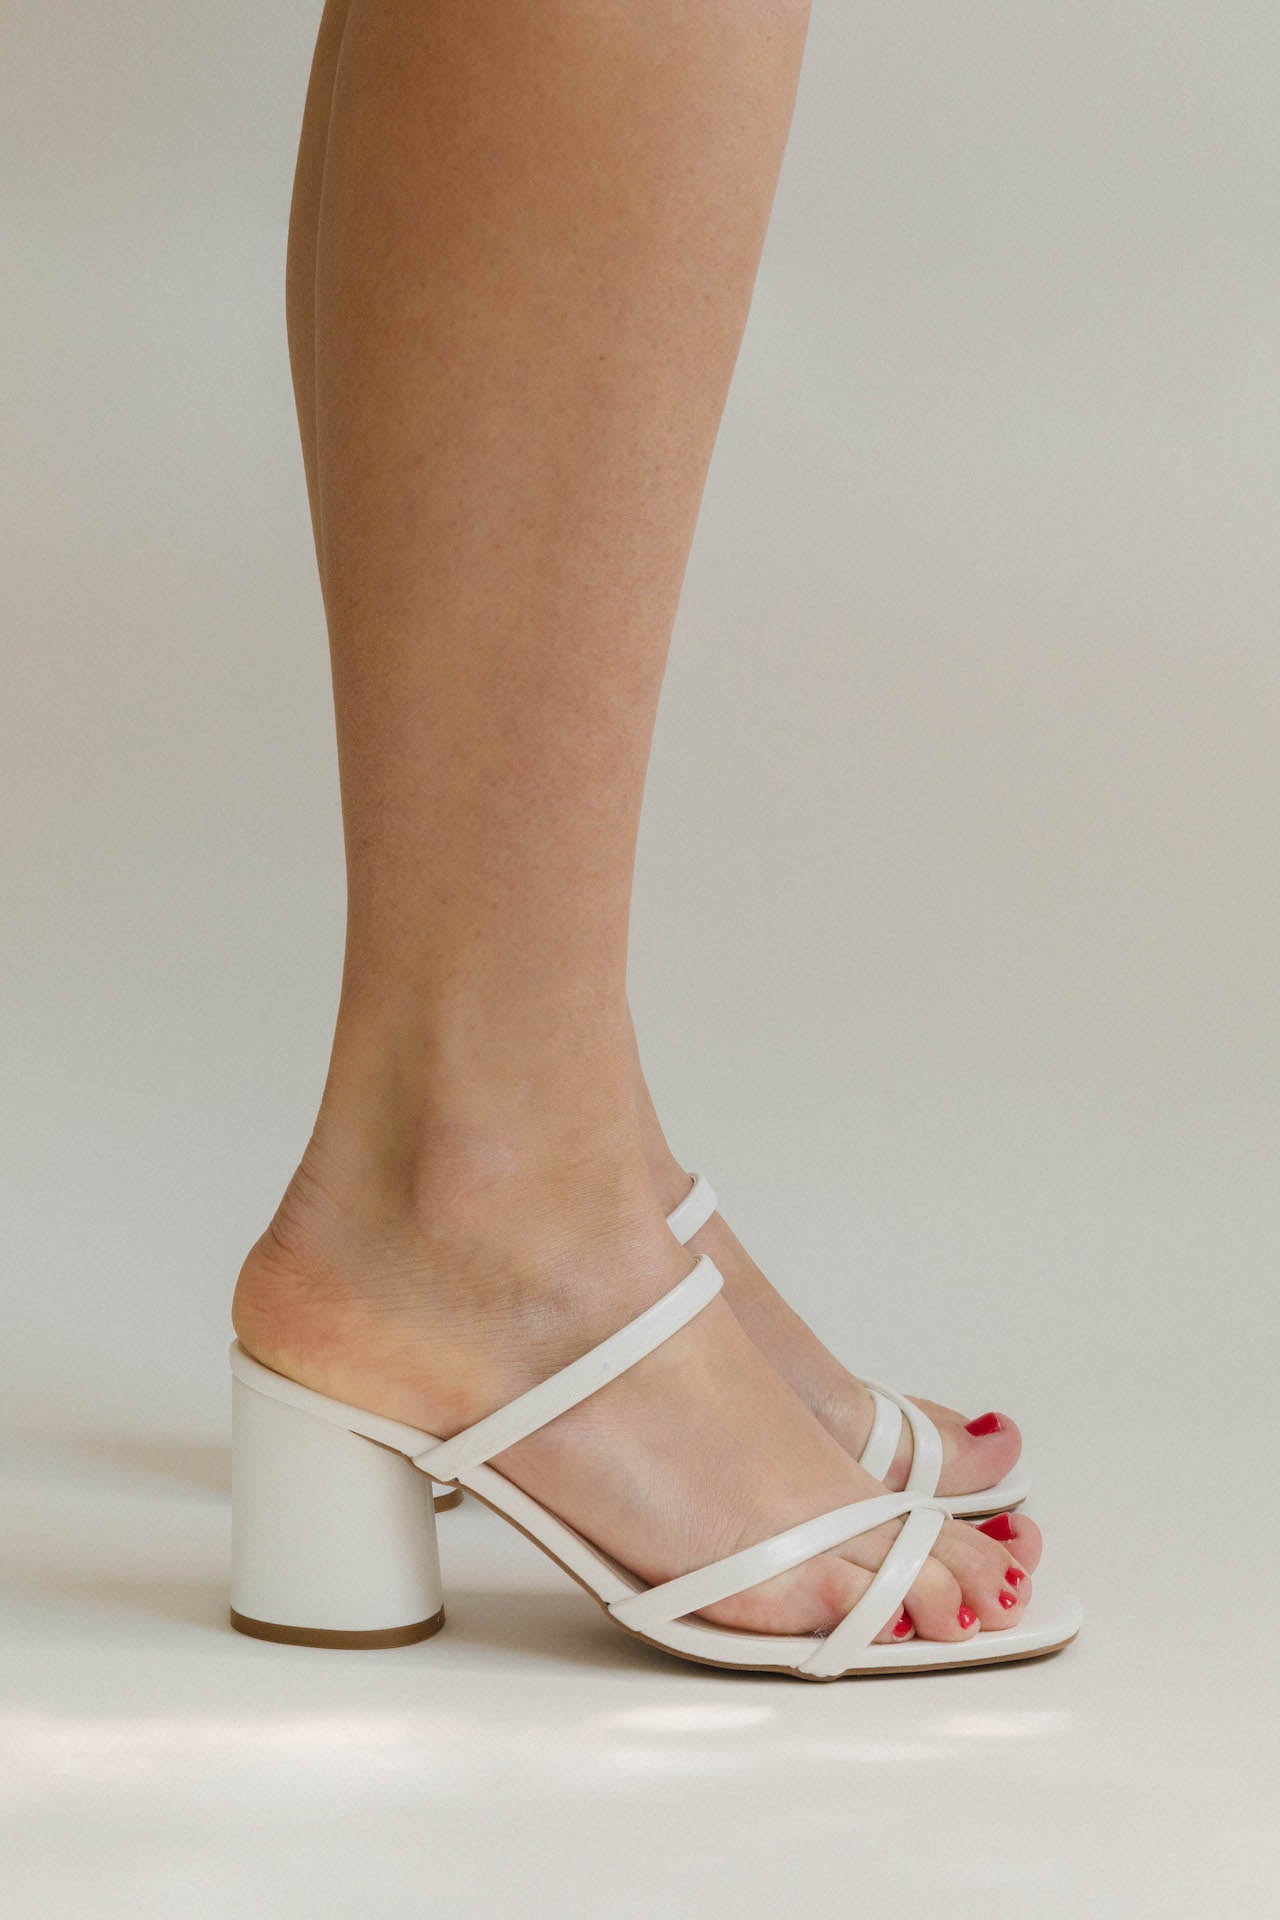 white strappy heel sandals with a low chunky block heel